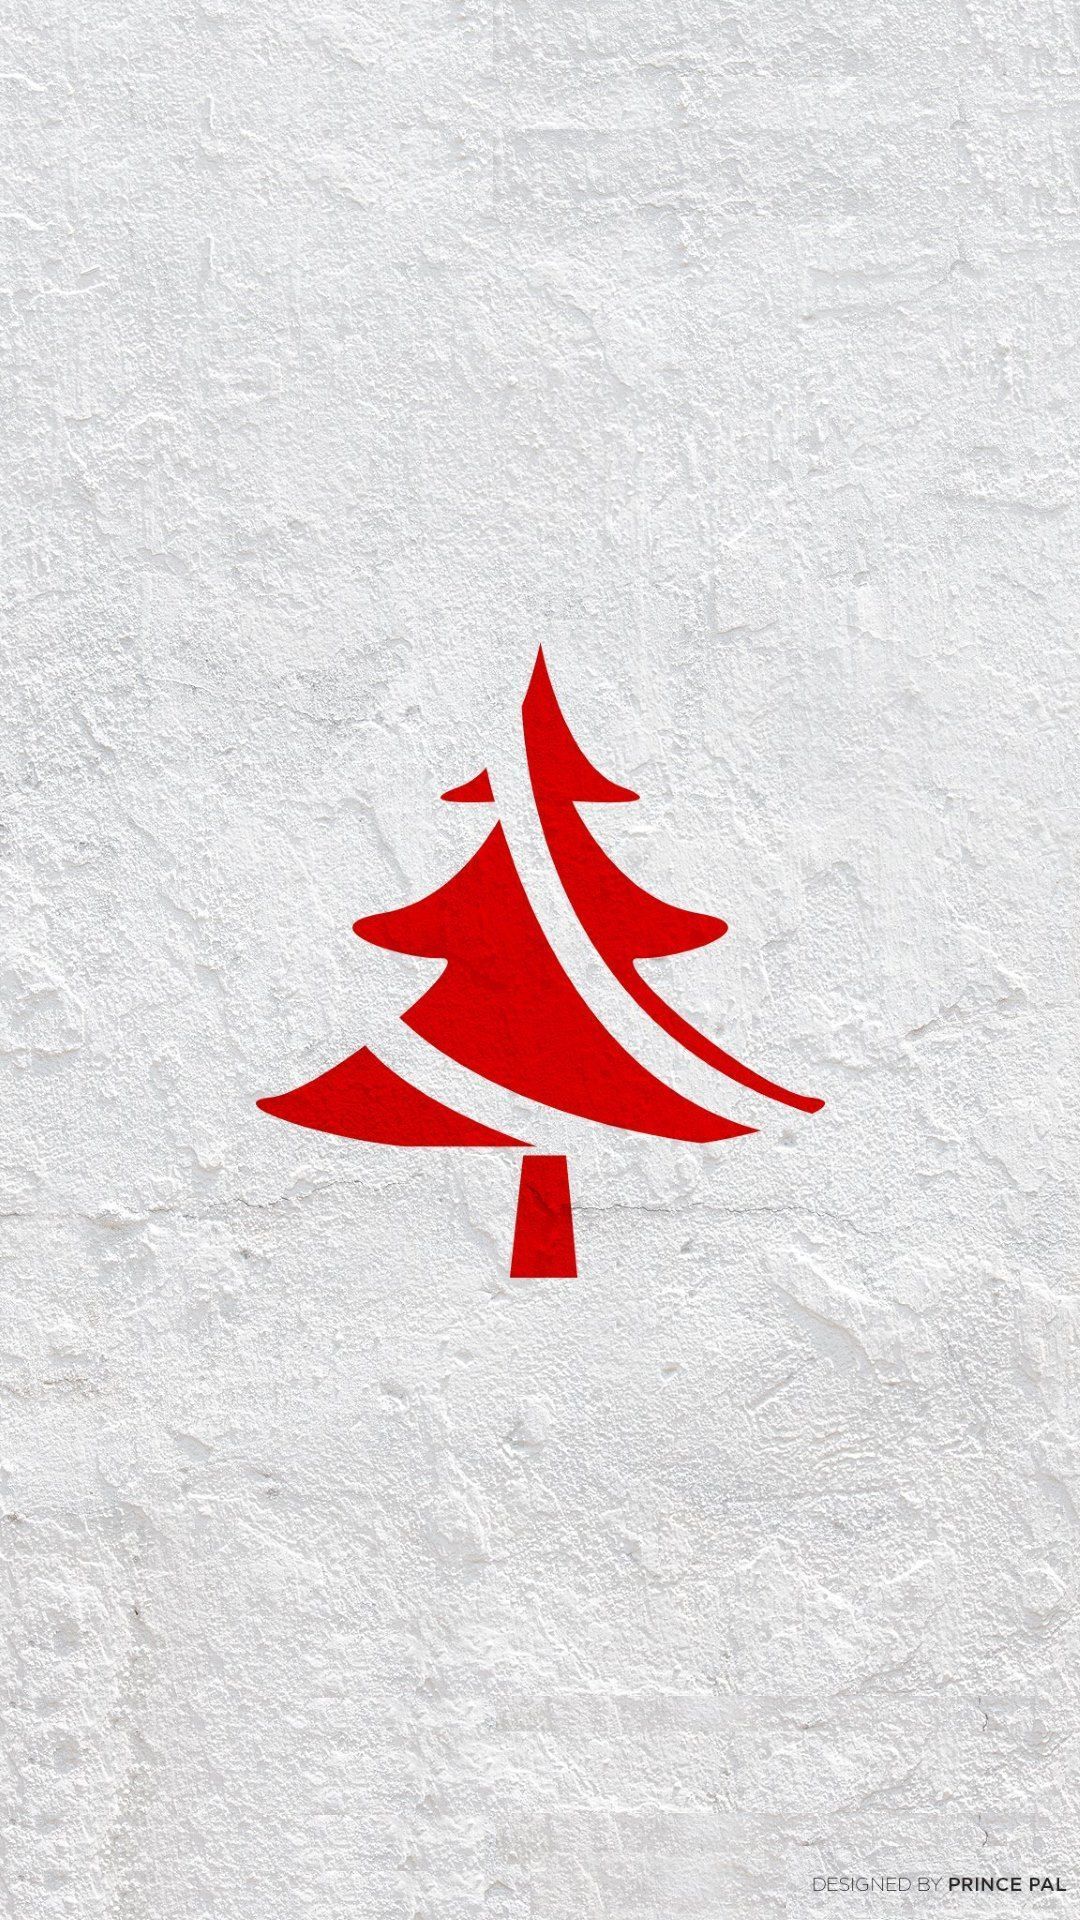 40 Minimalist Christmas Wallpapers for Desktop and iPhone